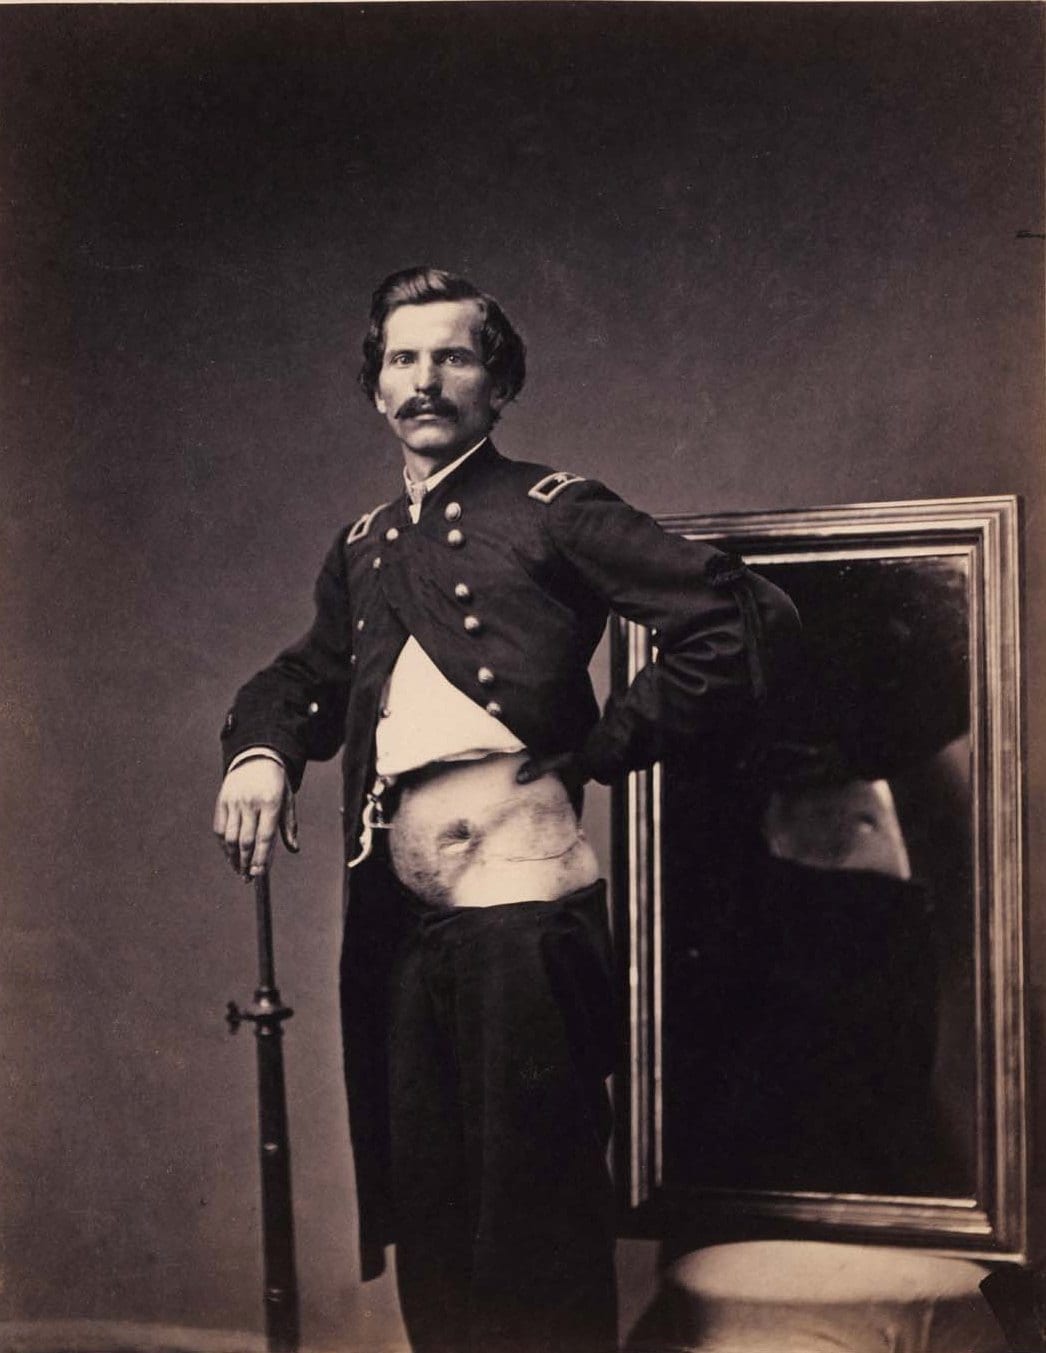 Photograph of injured Civil War soldier in front of a mirror